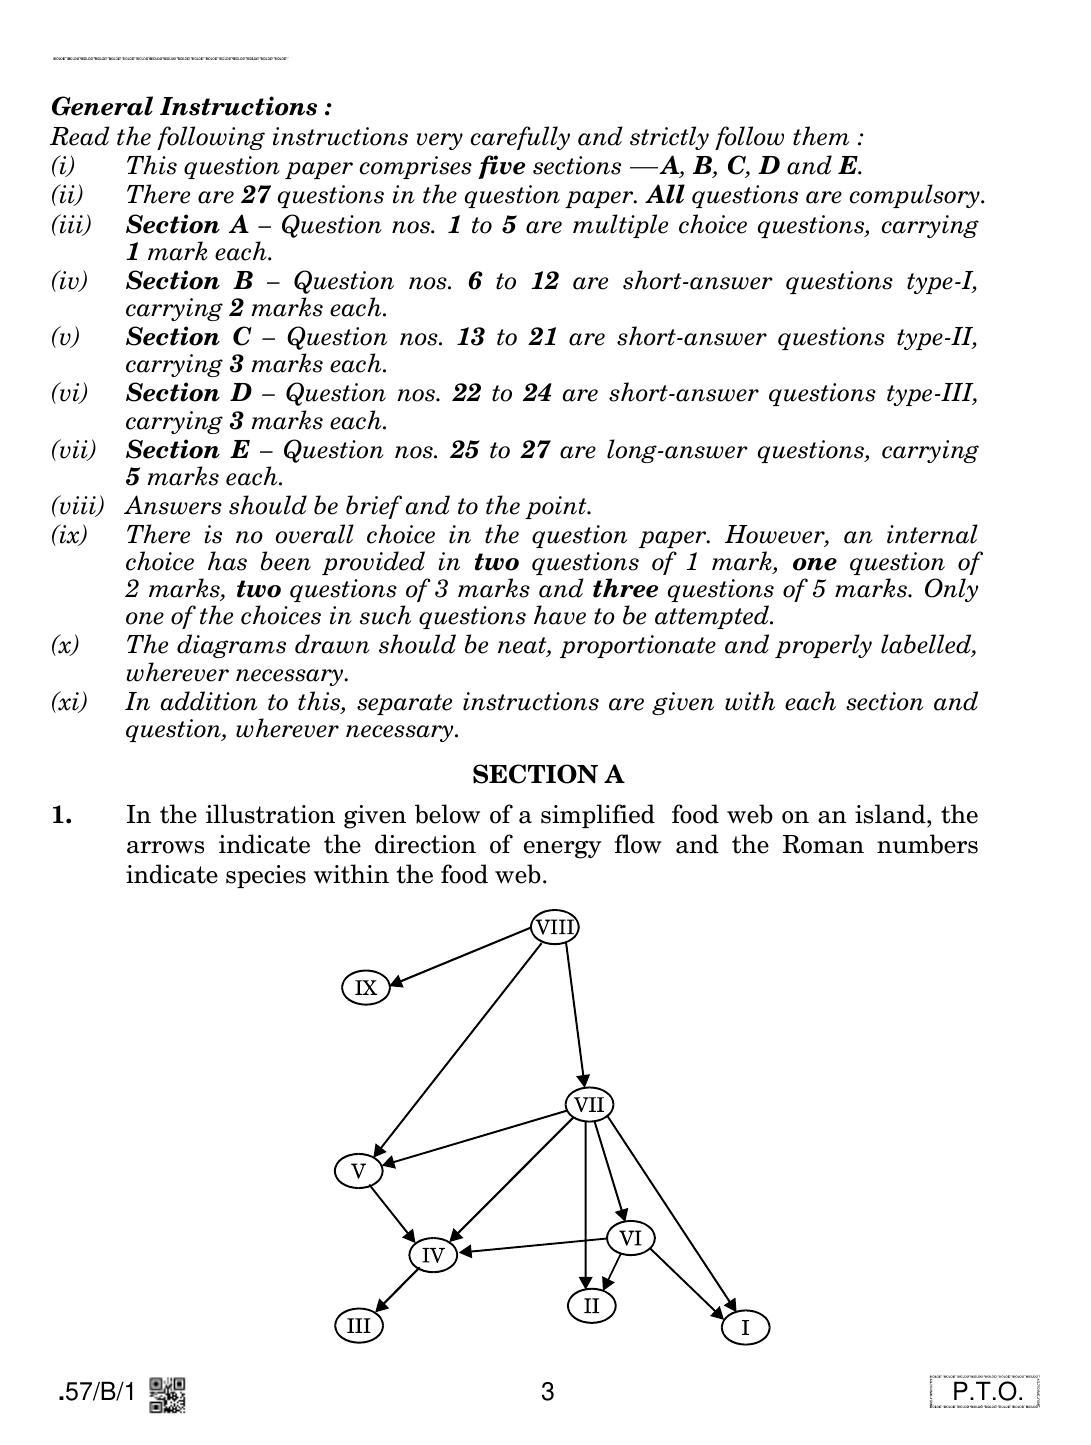 CBSE Class 12 57-C-1 - Biology 2020 Compartment Question Paper - Page 3